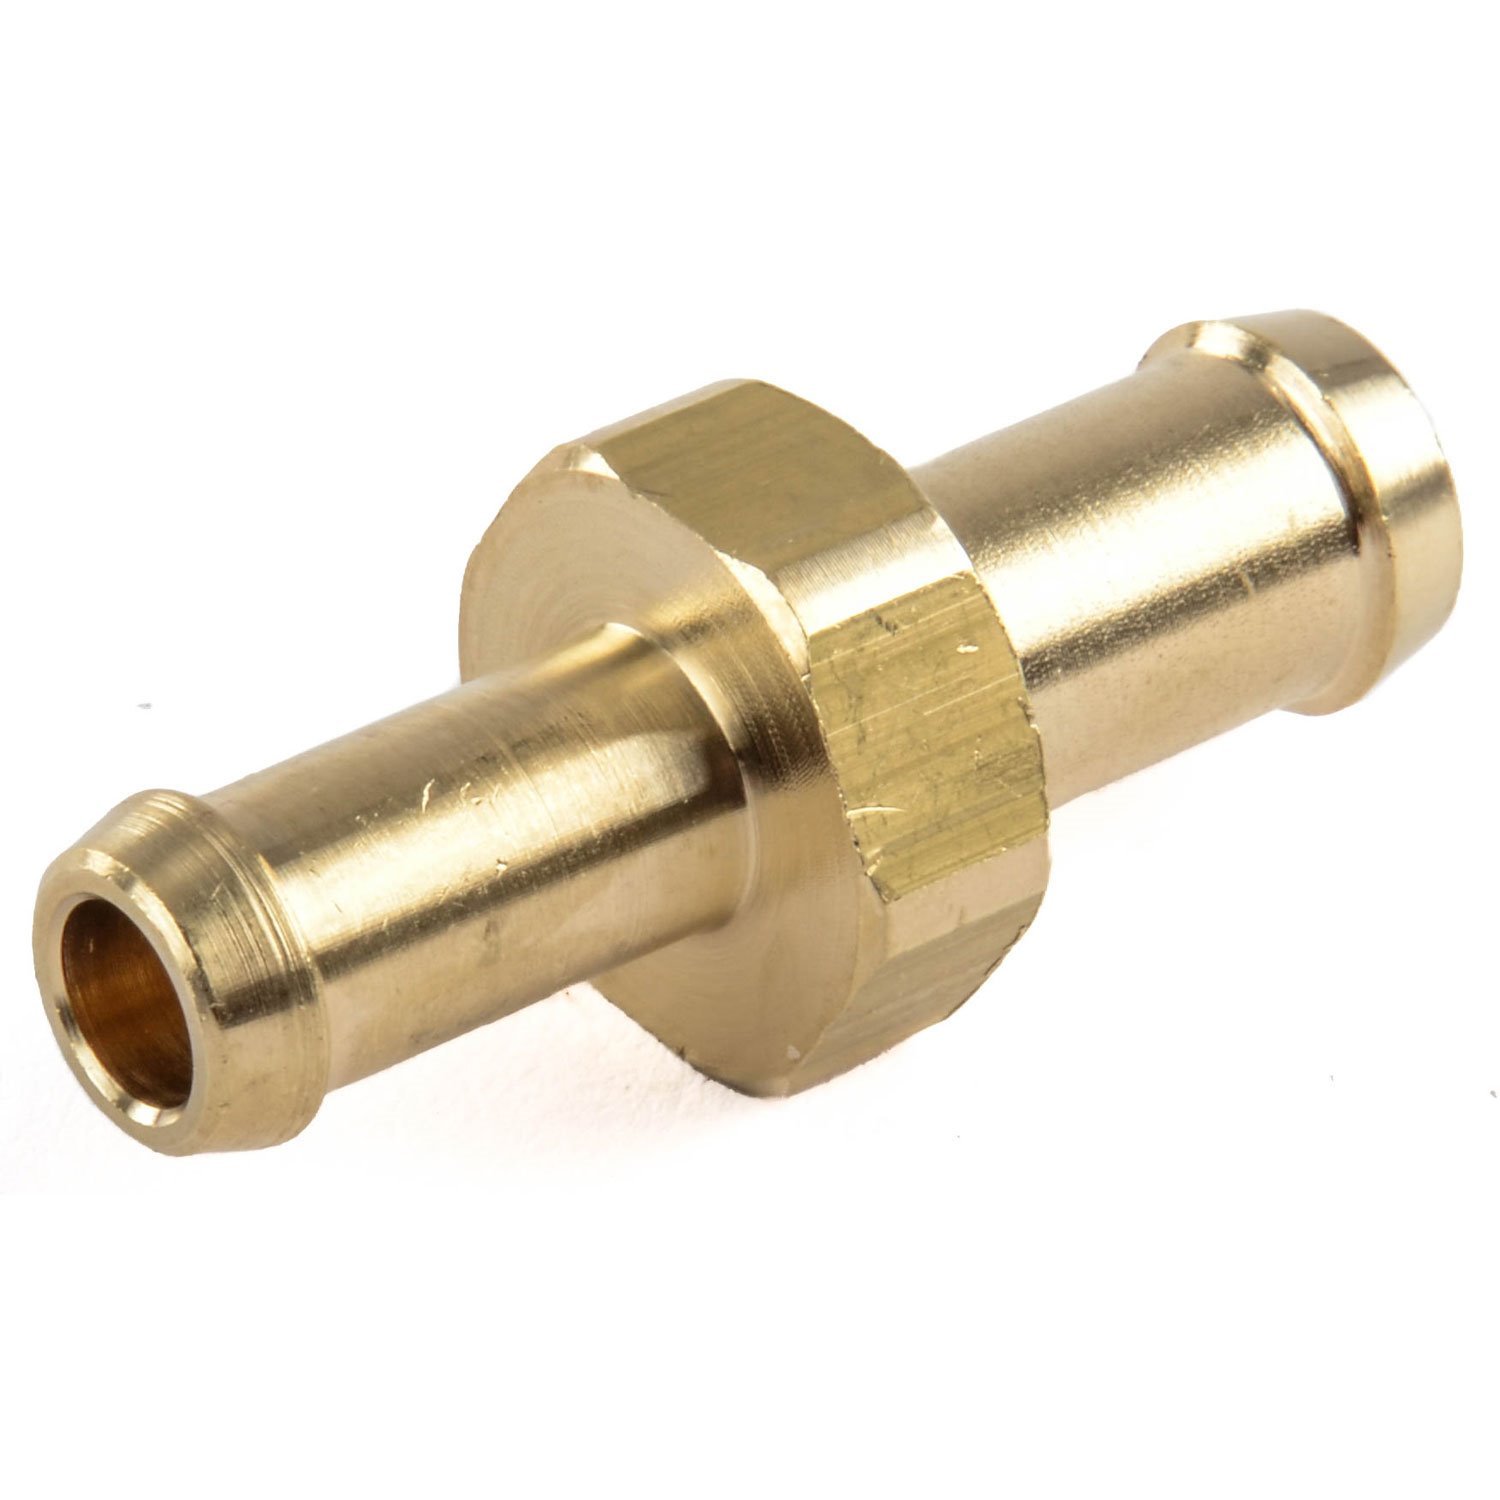 JEGS 15946: Brass Hose Adapter for 3/8 in. to 5/16 in. Hose - JEGS